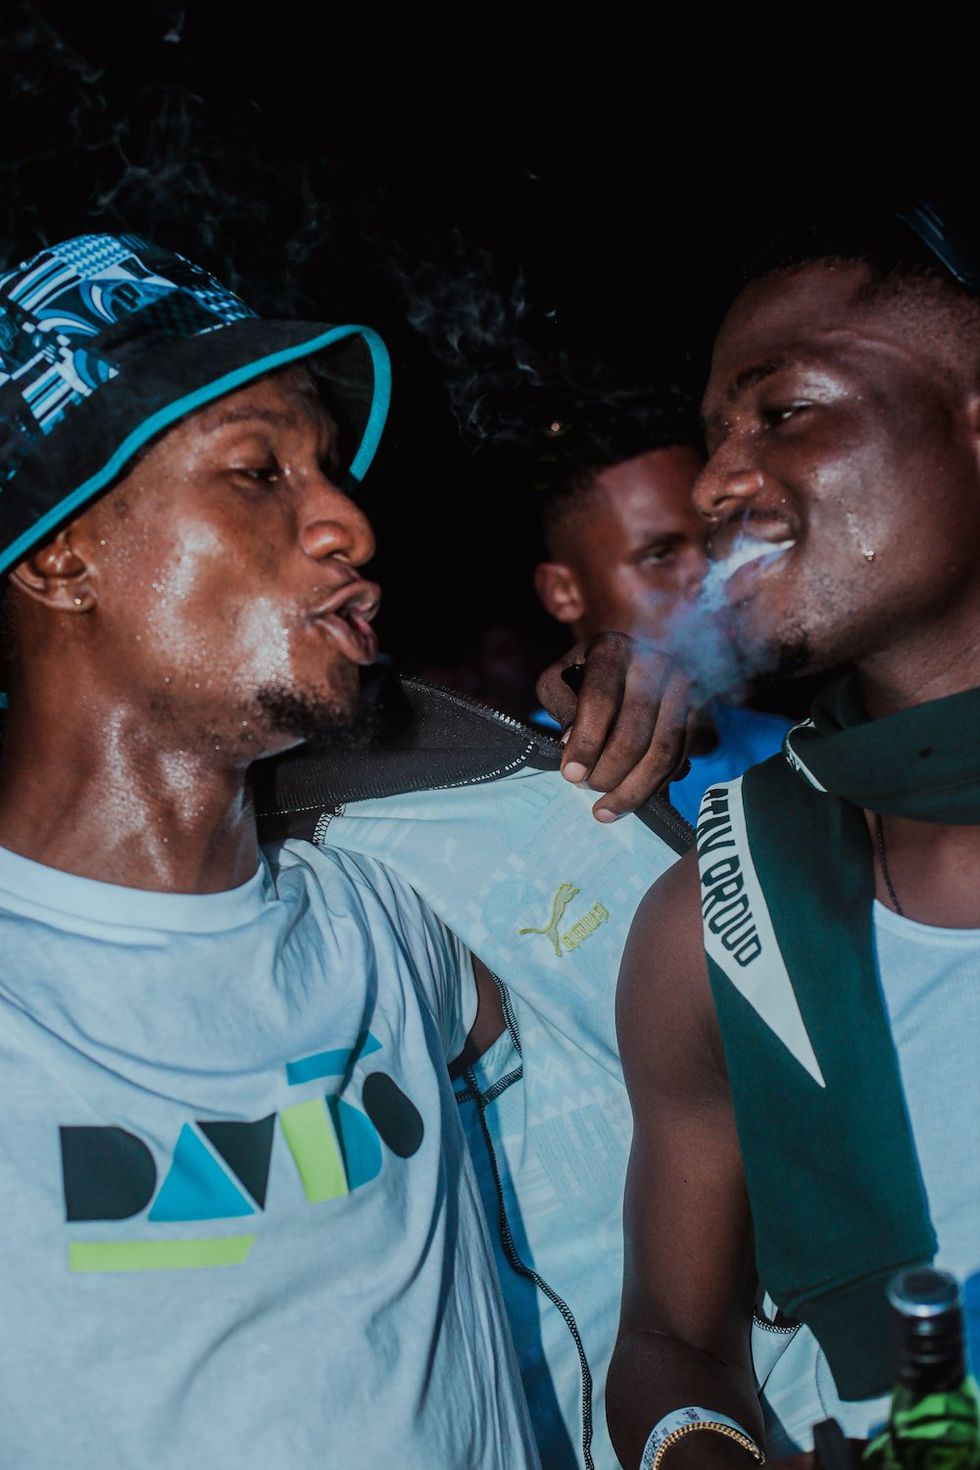 Crowd smokers at the Davido concert in Lagos.